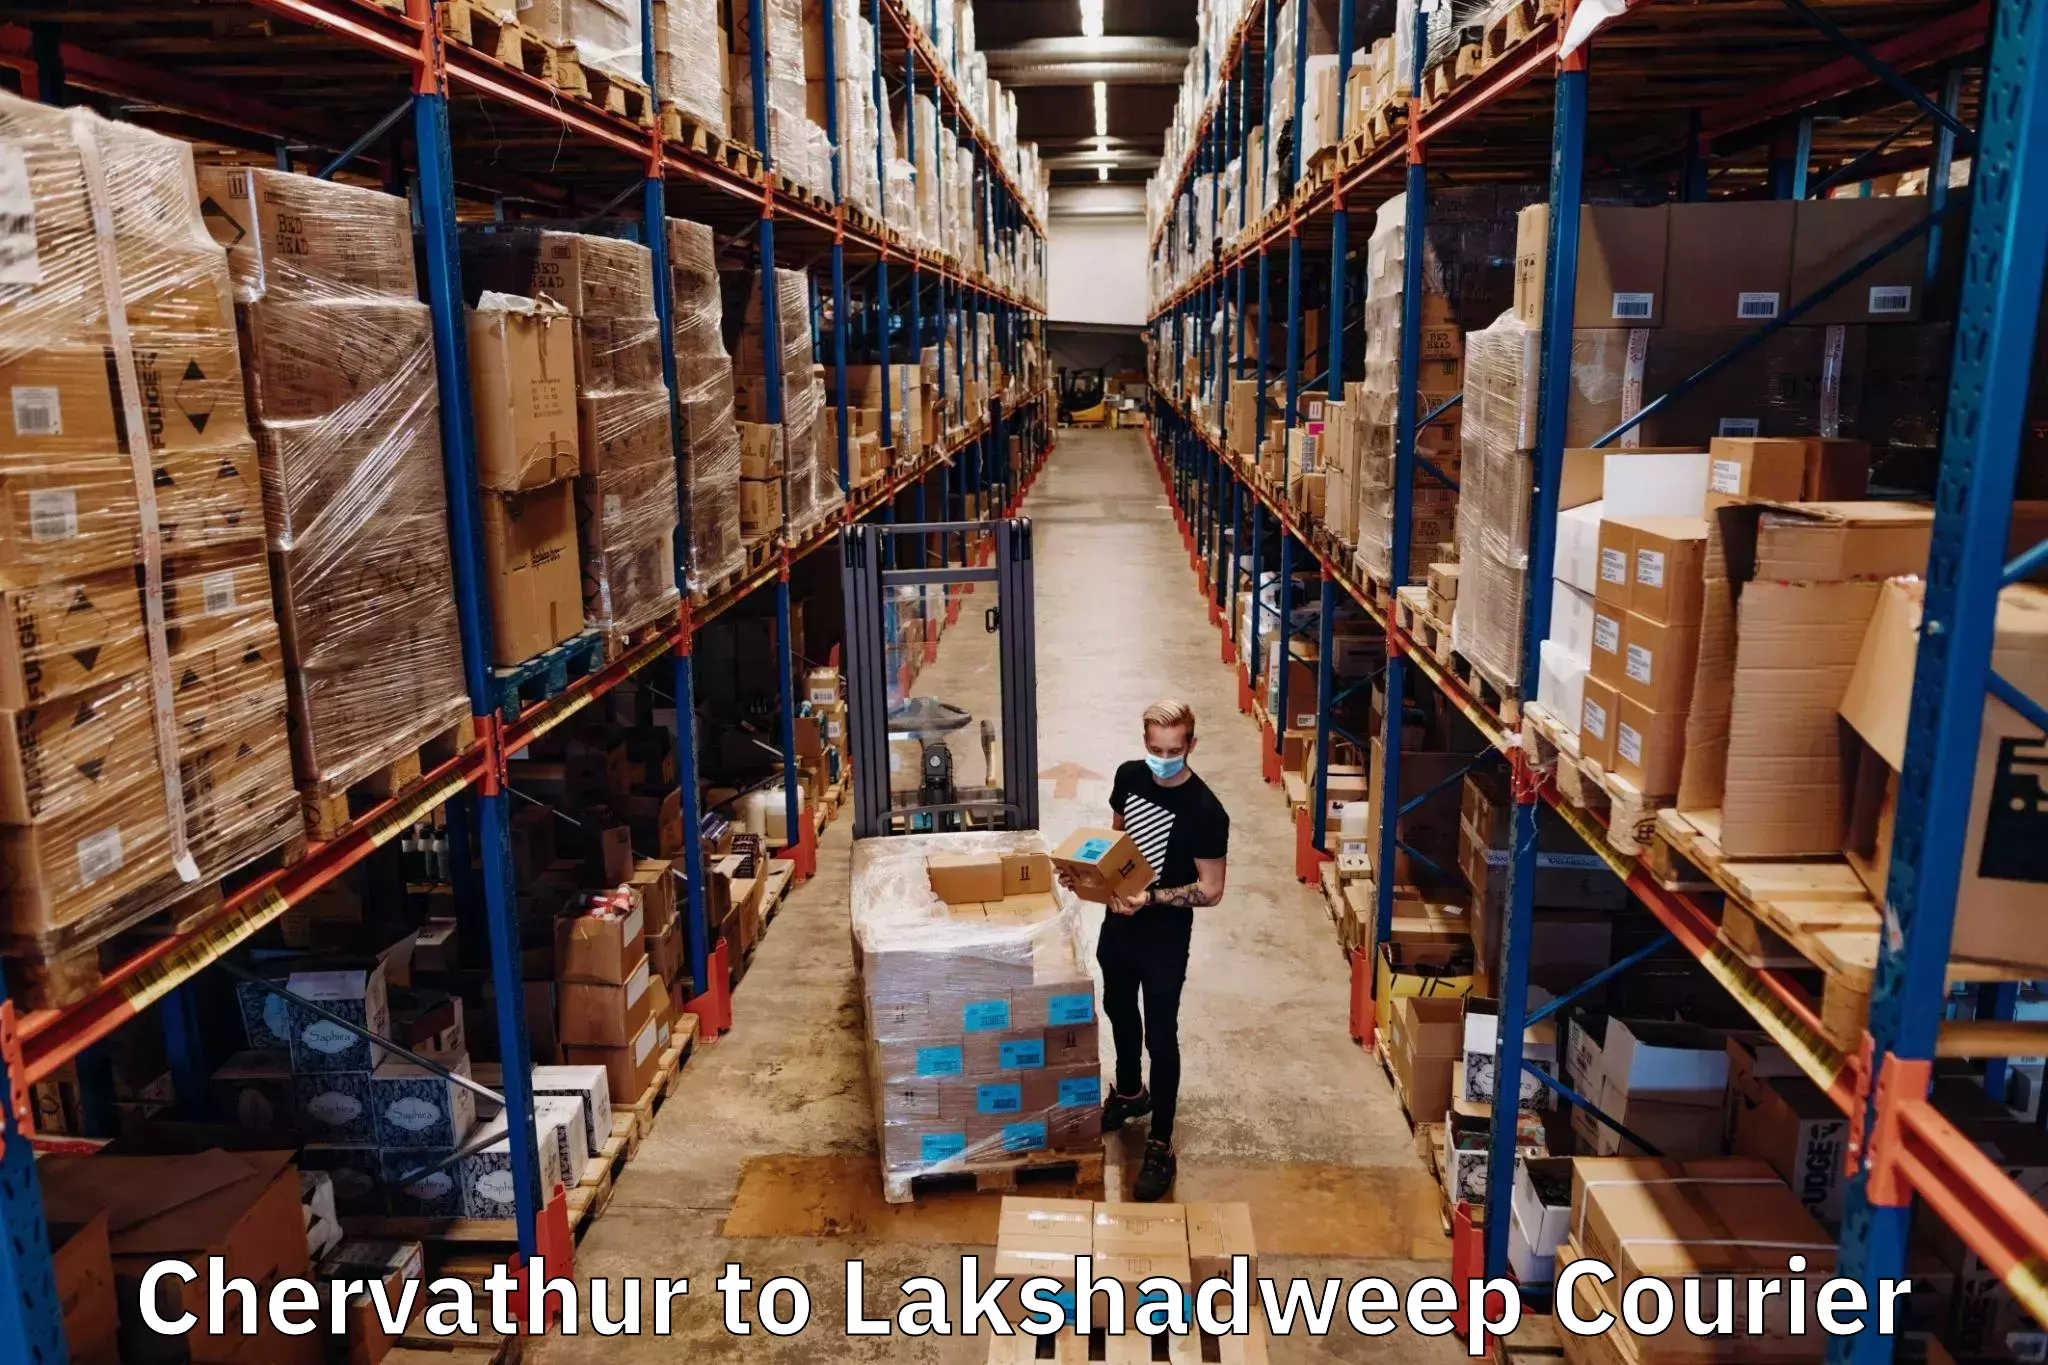 High-speed parcel service Chervathur to Lakshadweep